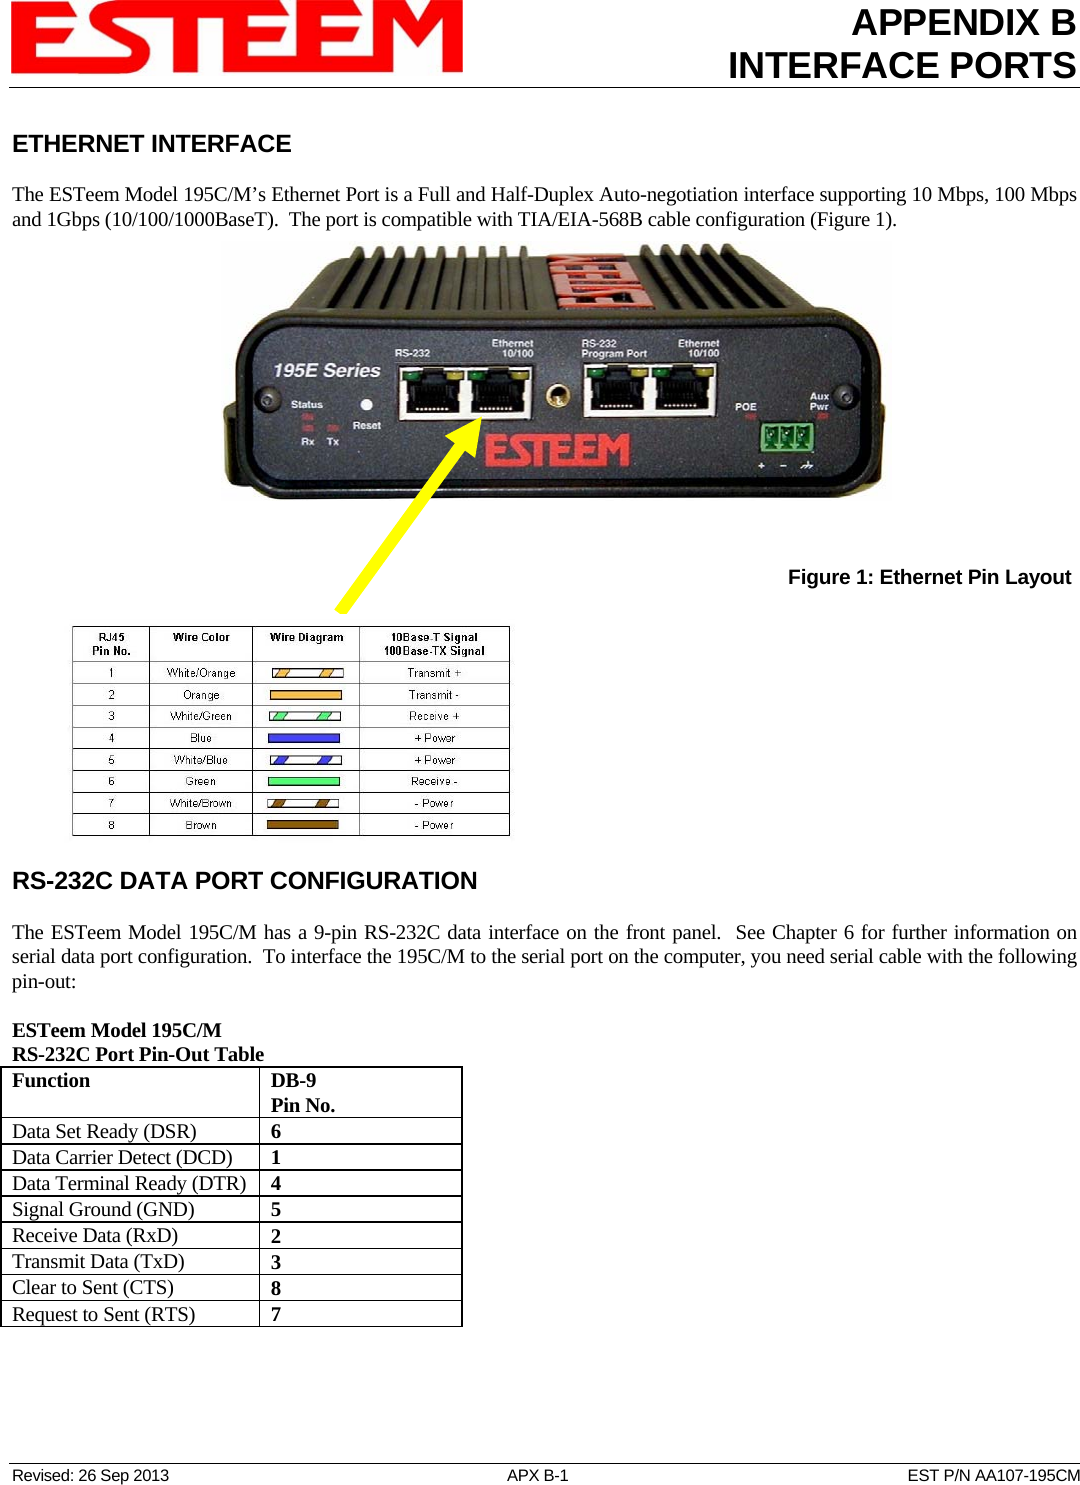 APPENDIX B INTERFACE PORTS   Revised: 26 Sep 2013  APX B-1  EST P/N AA107-195CM ETHERNET INTERFACE  The ESTeem Model 195C/M’s Ethernet Port is a Full and Half-Duplex Auto-negotiation interface supporting 10 Mbps, 100 Mbps and 1Gbps (10/100/1000BaseT).  The port is compatible with TIA/EIA-568B cable configuration (Figure 1).              Figure 1: Ethernet Pin Layout RS-232C DATA PORT CONFIGURATION  The ESTeem Model 195C/M has a 9-pin RS-232C data interface on the front panel.  See Chapter 6 for further information on serial data port configuration.  To interface the 195C/M to the serial port on the computer, you need serial cable with the following pin-out:  ESTeem Model 195C/M RS-232C Port Pin-Out Table Function  DB-9 Pin No. Data Set Ready (DSR)  6 Data Carrier Detect (DCD)  1 Data Terminal Ready (DTR)  4 Signal Ground (GND)  5 Receive Data (RxD)  2 Transmit Data (TxD)  3 Clear to Sent (CTS)  8 Request to Sent (RTS)  7  